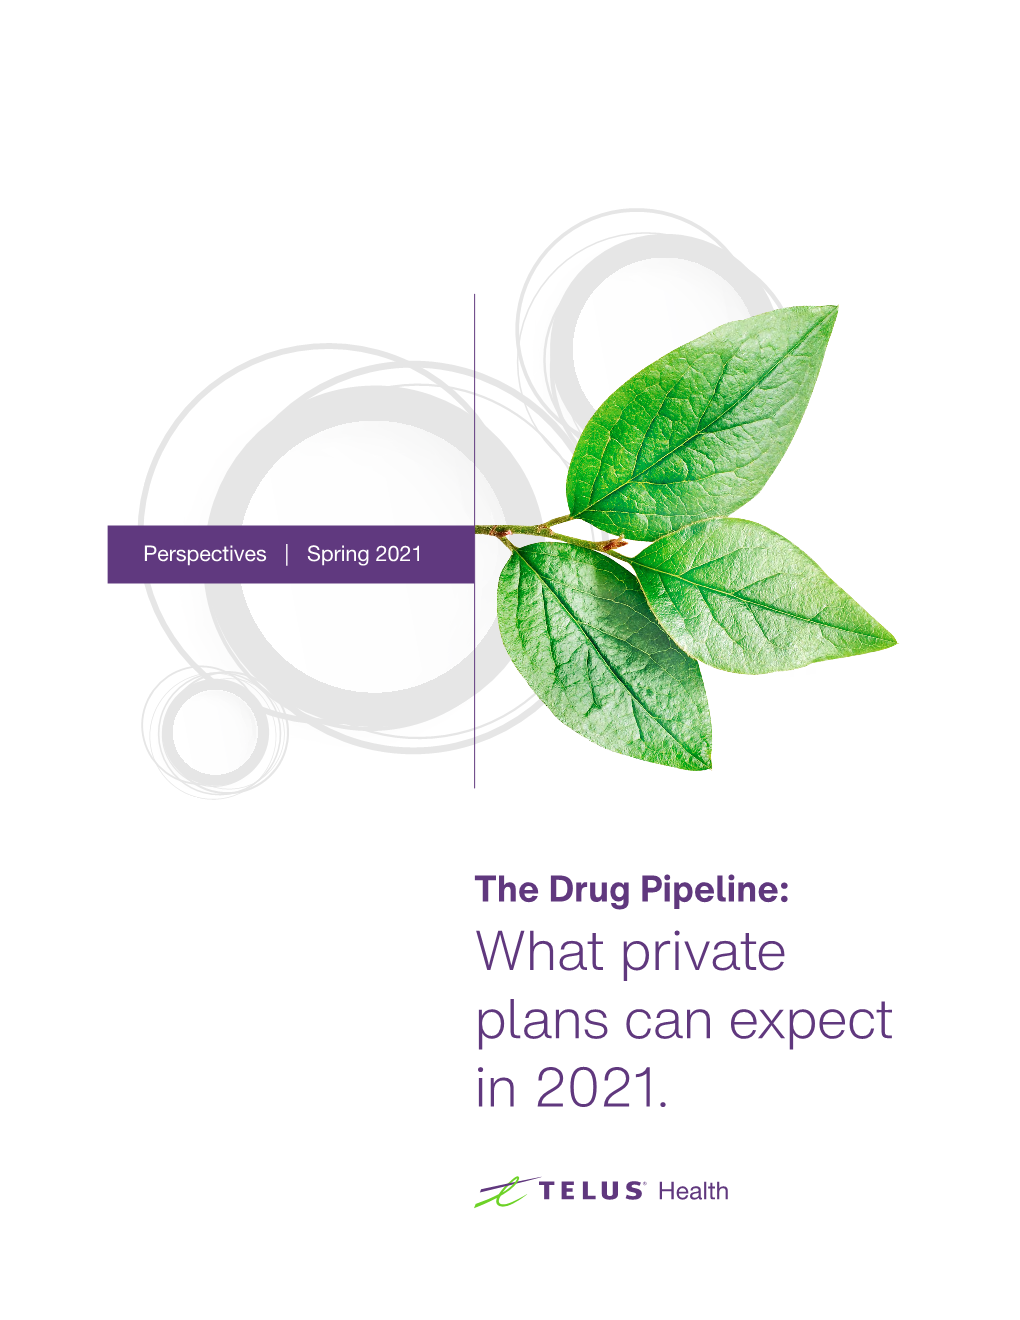 The Drug Pipeline: What Private Plans Can Expect in 2021